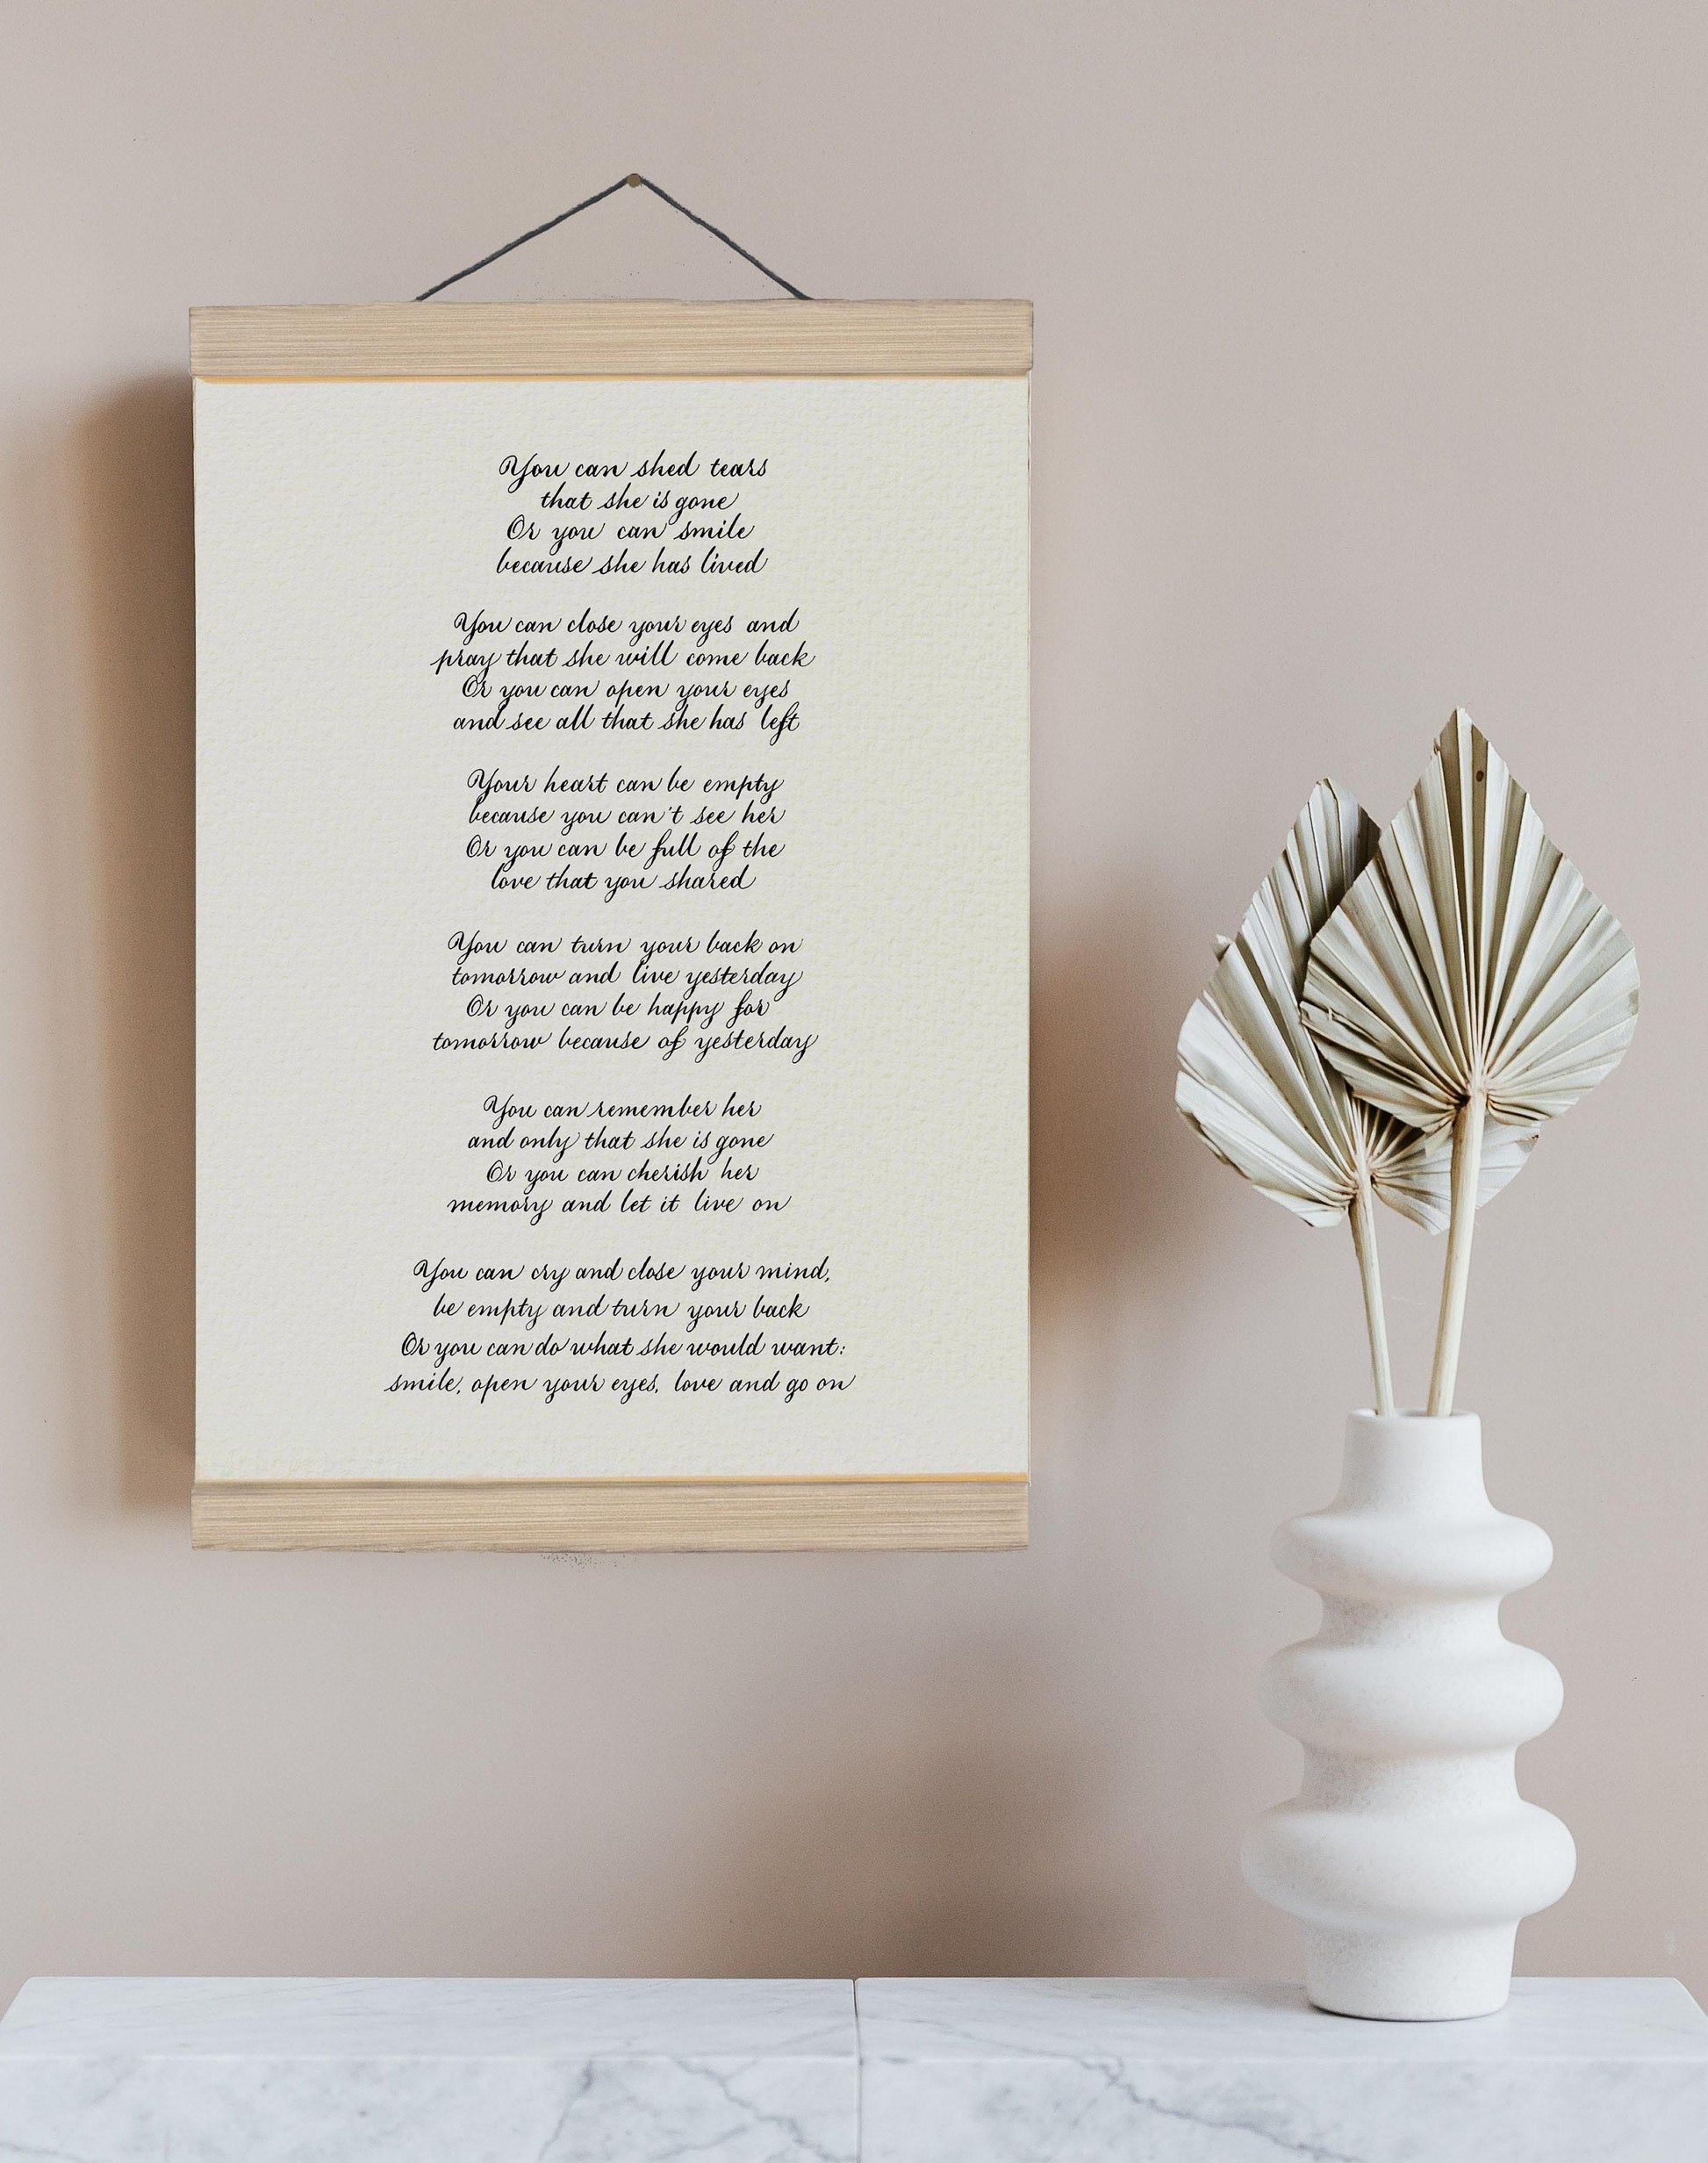 She is gone Funeral reading print poem - funeral favors - celebration of life - Bereavement gift - Memorial - Remembrance - Sympathy Gift